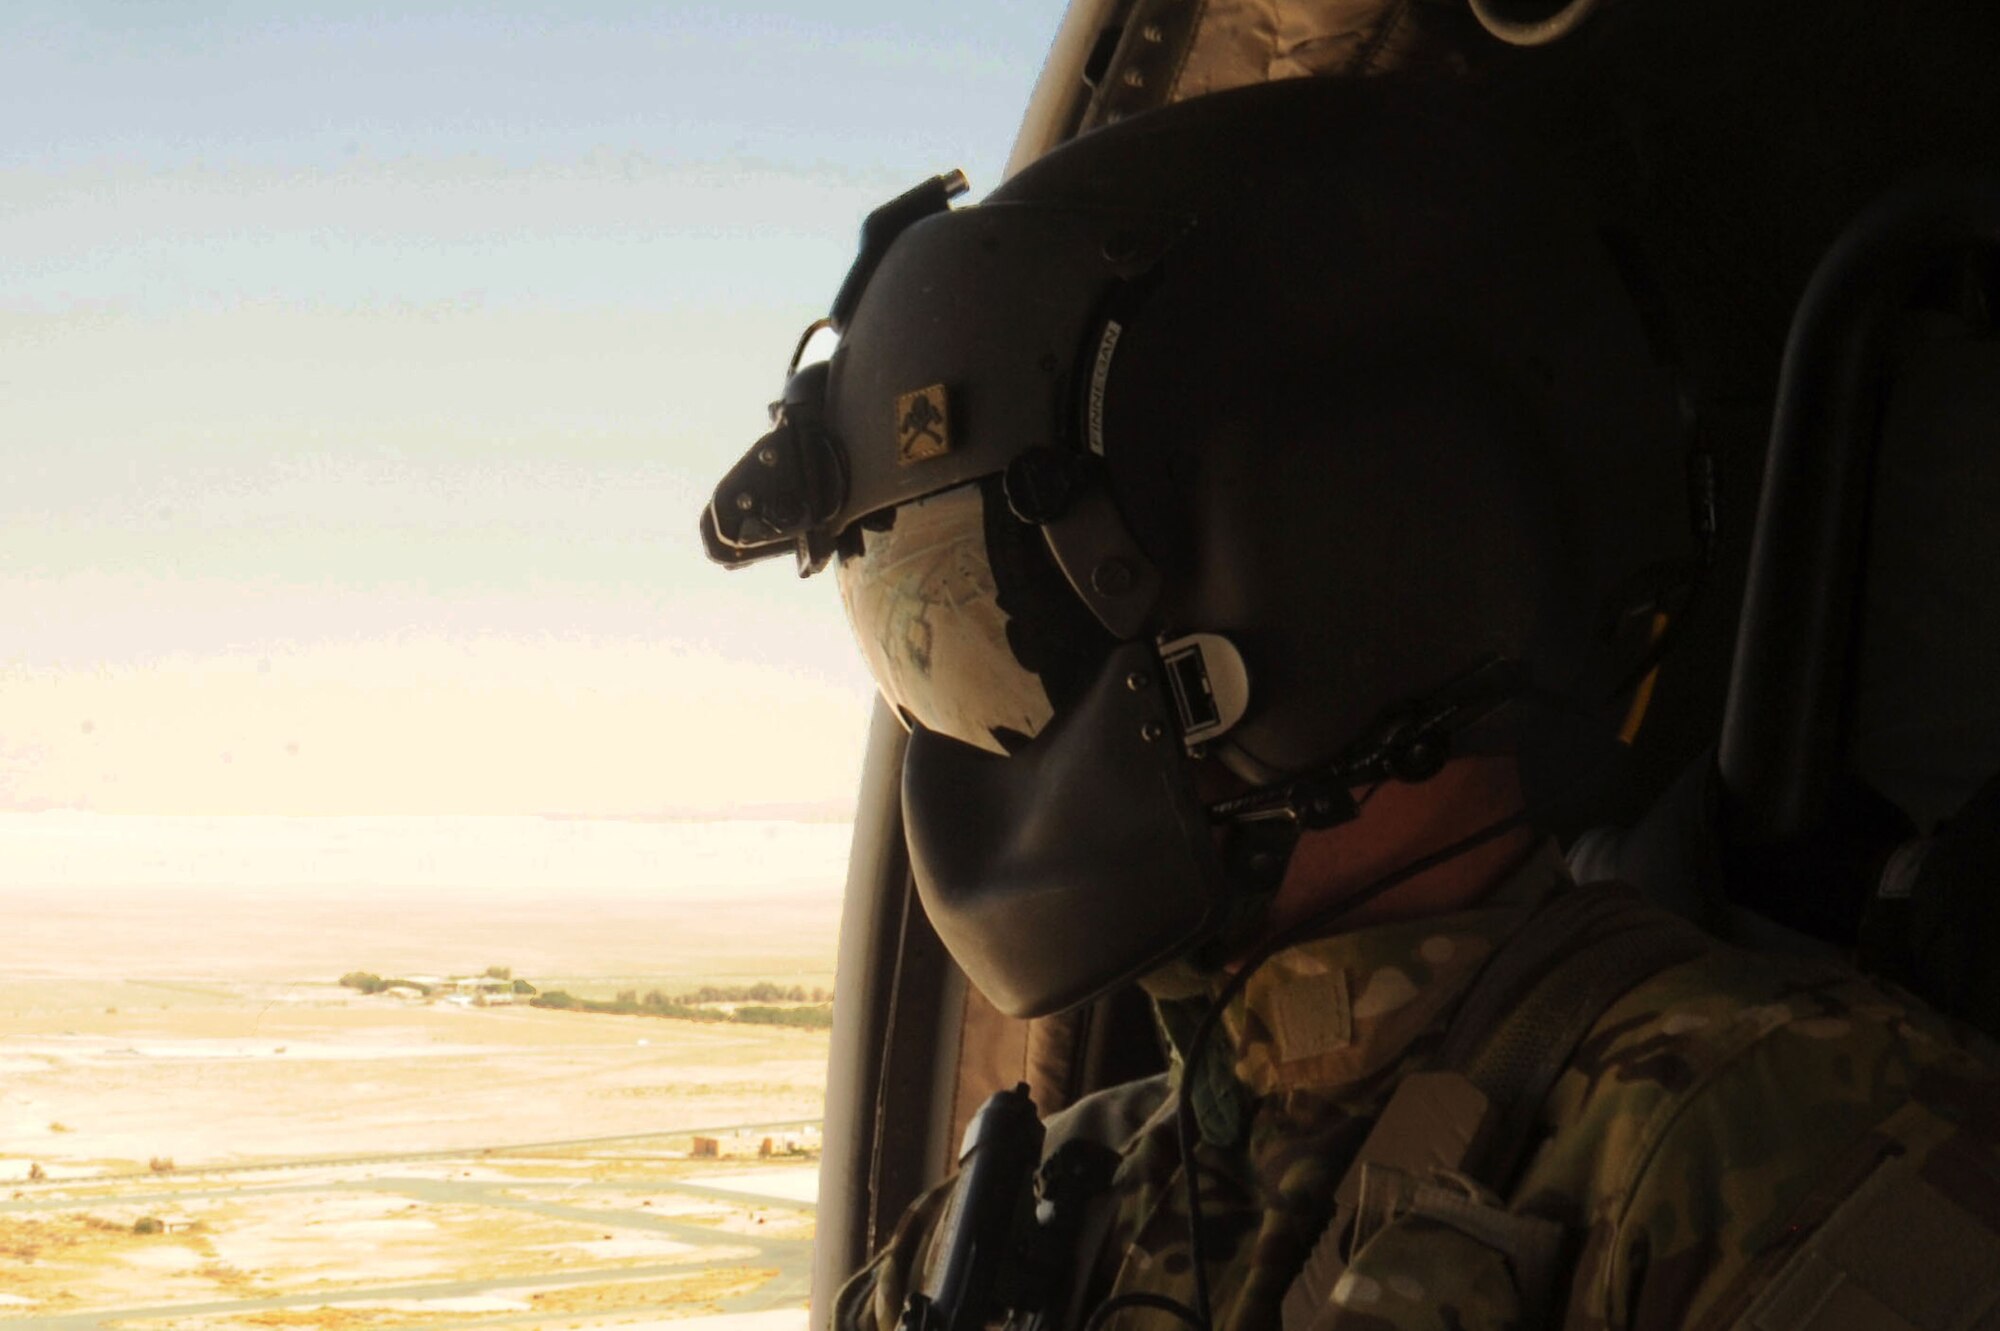 U.S. Army Spc. Shane Finnegan, HH-60G Pave Hawk helicopter crew chief, looks out the side of the aircraft during medical evacuation training Oct. 14, 2016 at an undisclosed location in Southwest Asia. Army flight medics led Air Force first responders and coalition partner medics in med evac training to improve mission capabilities. (U.S. Air Force photo/Senior Airman Zachary Kee)